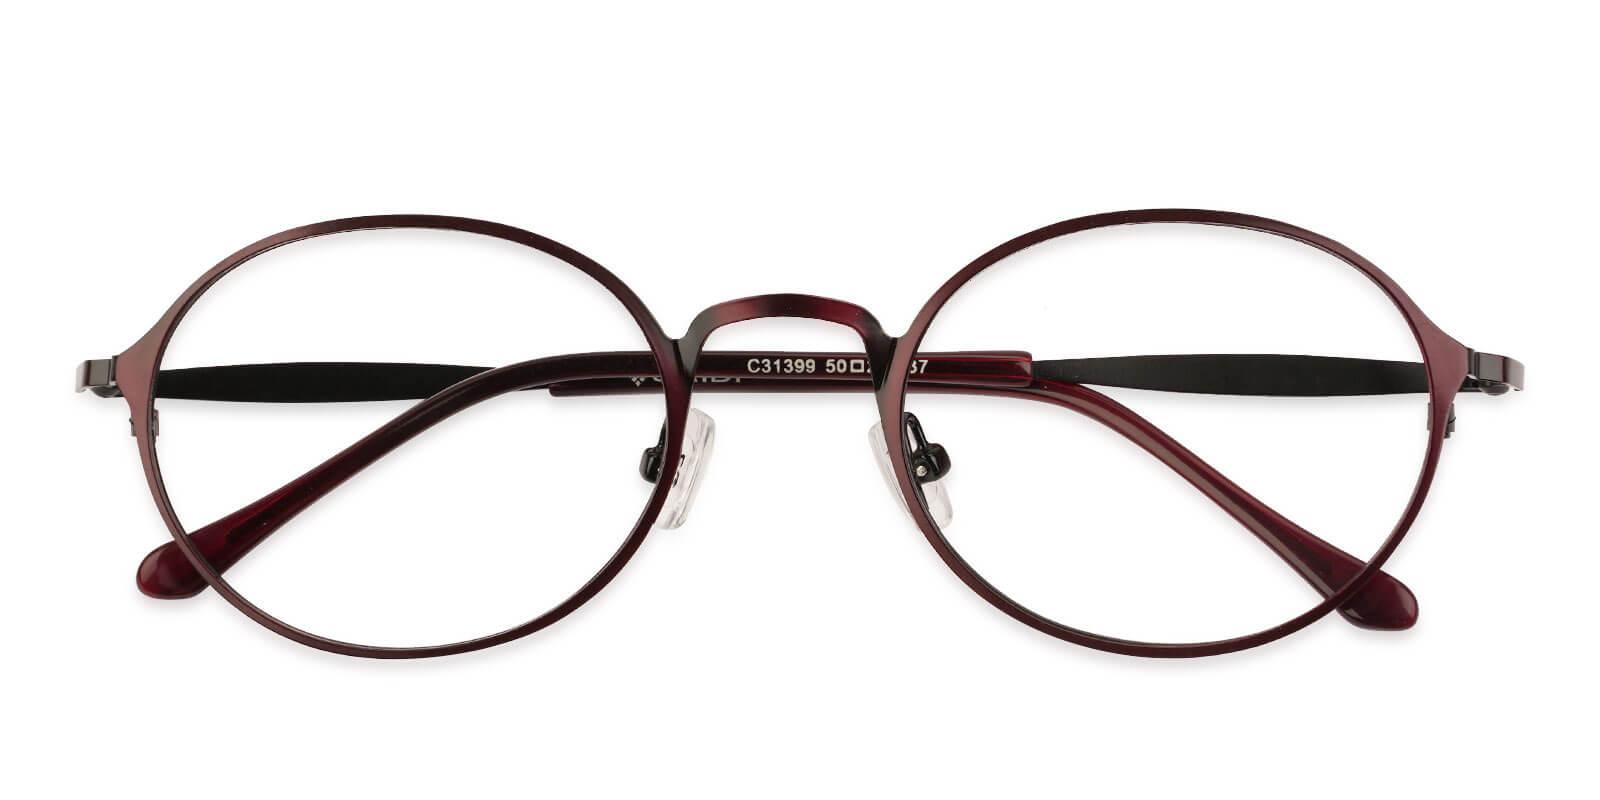 Toughery Red Metal Eyeglasses , NosePads Frames from ABBE Glasses